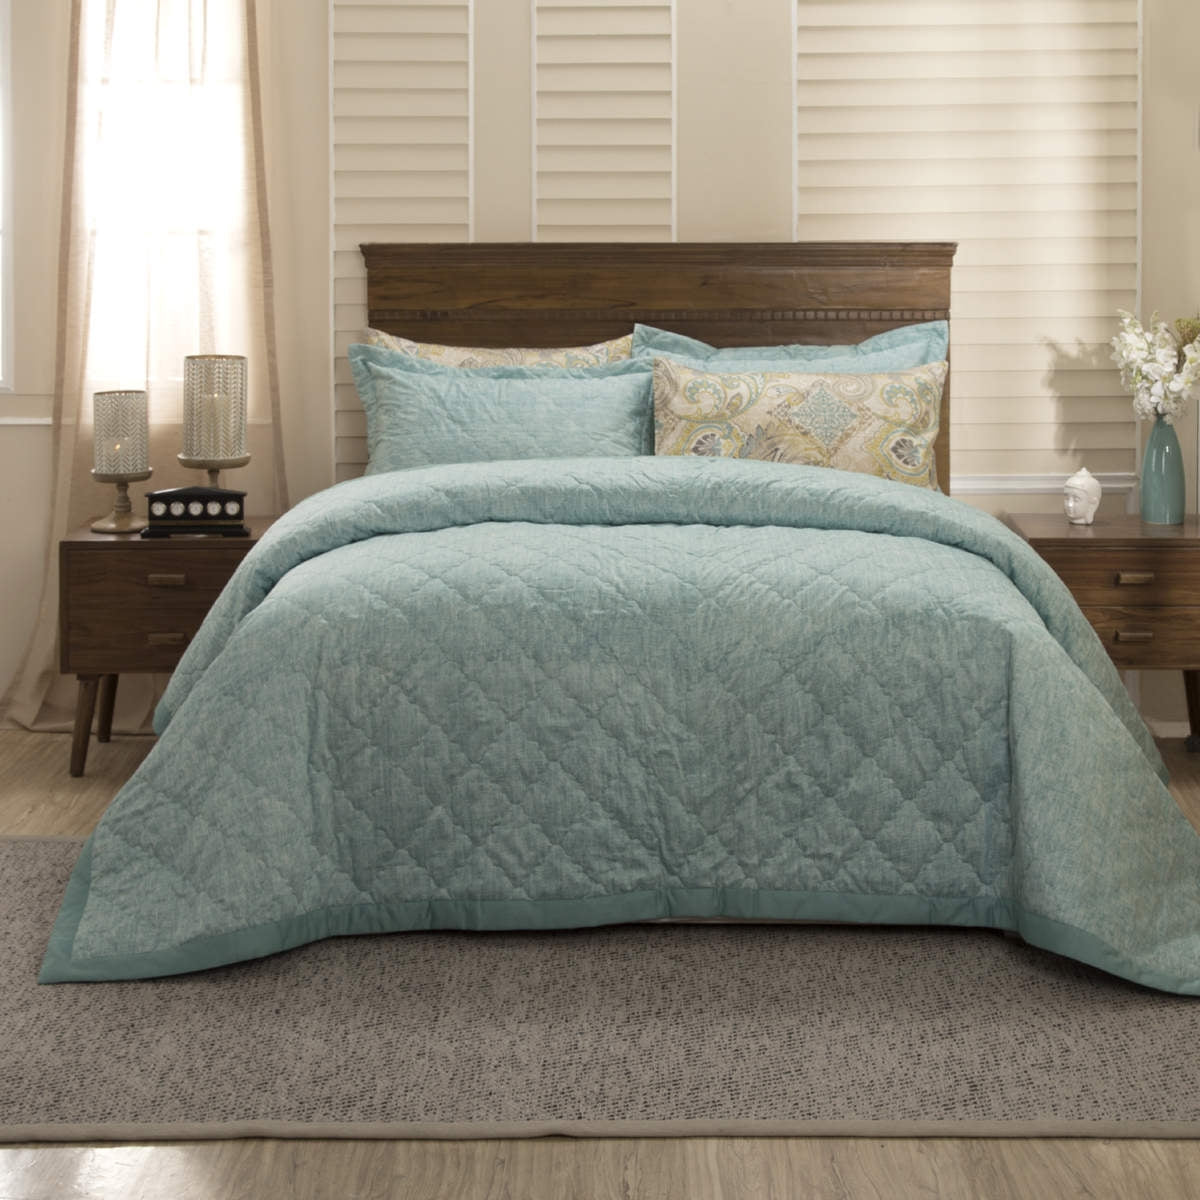 Classical Fusion Barre Summer AC Quilt/Quilted Bed Cover/Comforter Turquoise